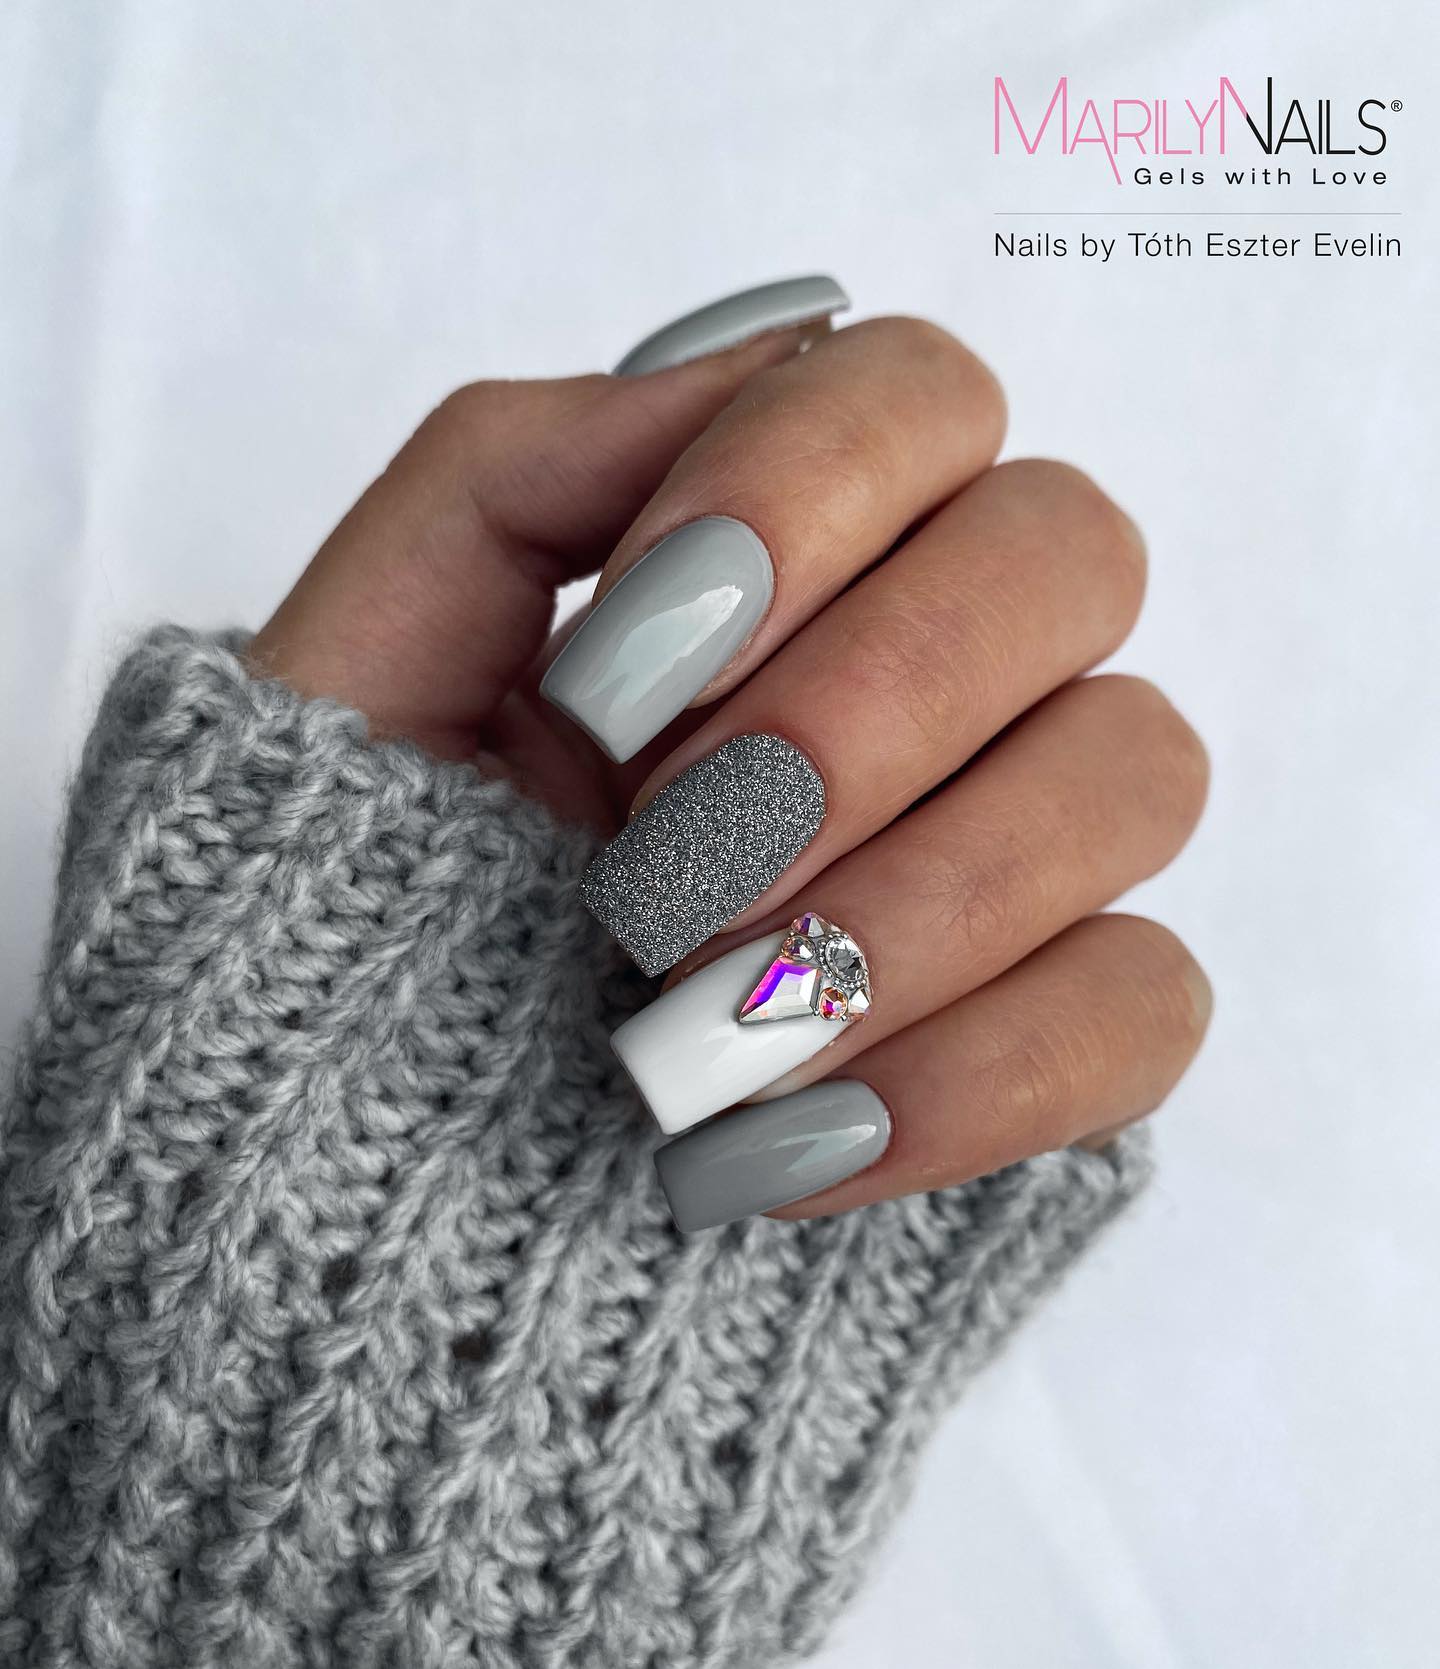 Long Square Grey Nails with Rhinestones on Accent Nail